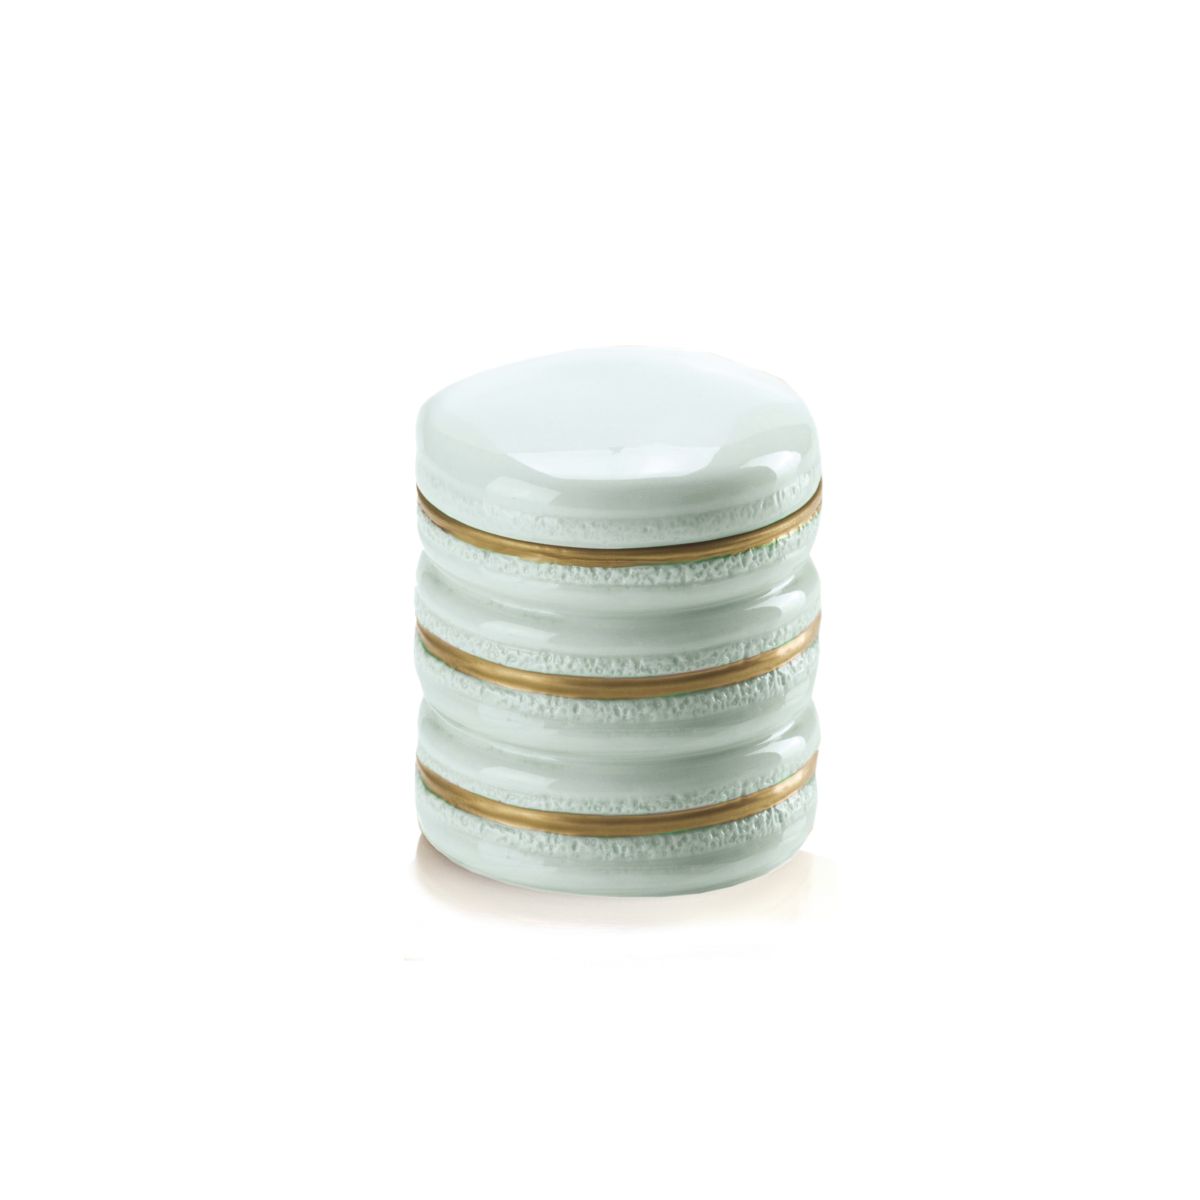 Chantilly Macaron Scented Candle - Aquamarine & Gold